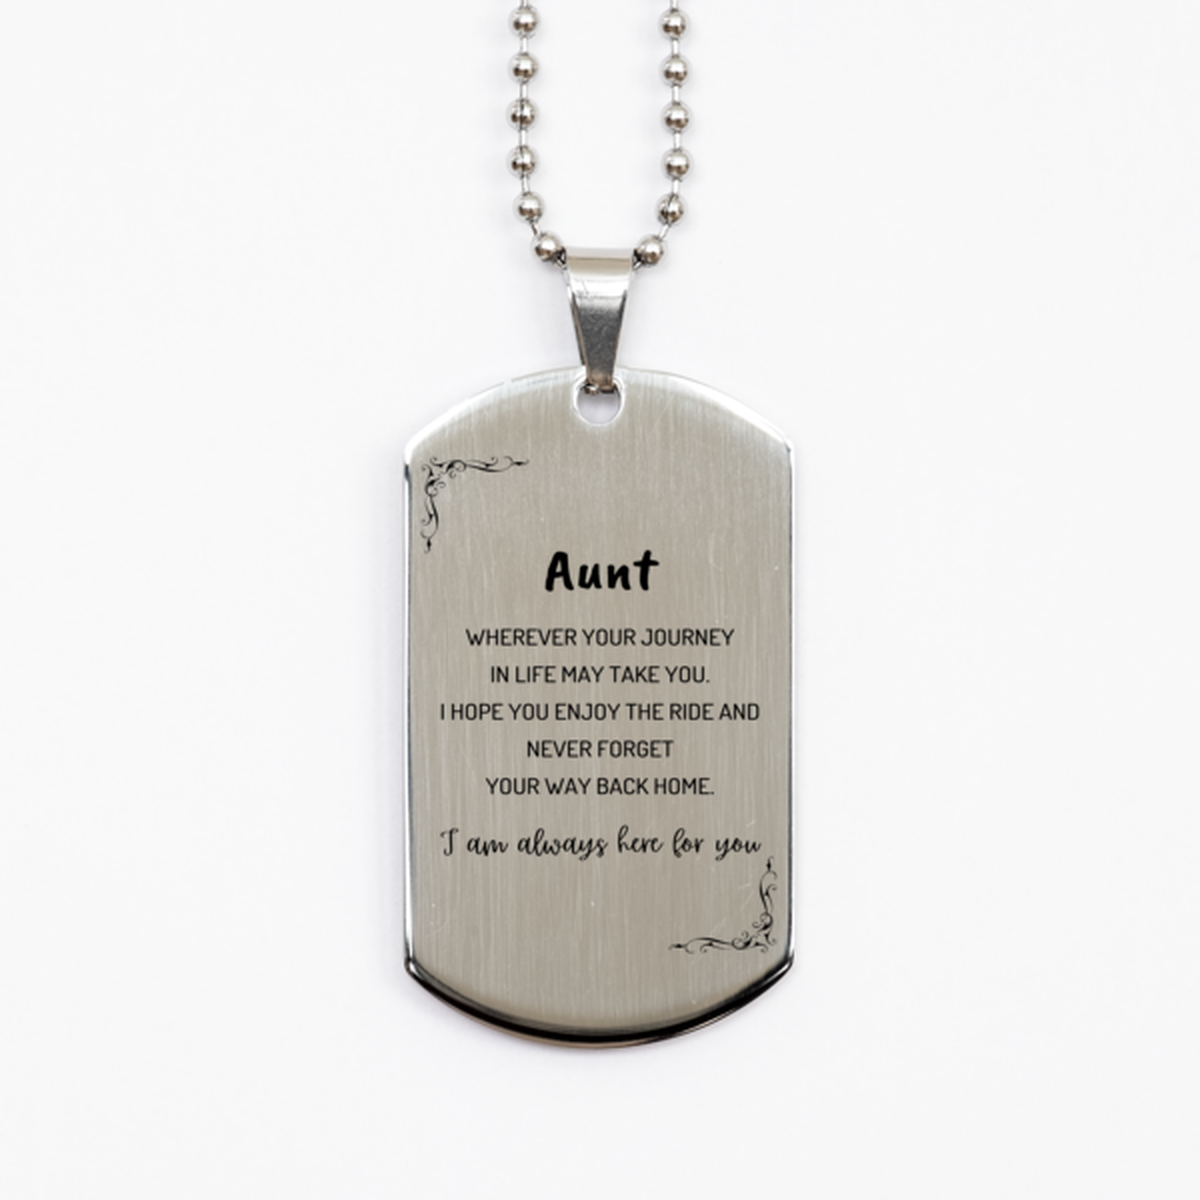 Aunt wherever your journey in life may take you, I am always here for you Aunt Silver Dog Tag, Awesome Christmas Gifts For Aunt, Aunt Birthday Gifts for Men Women Family Loved One